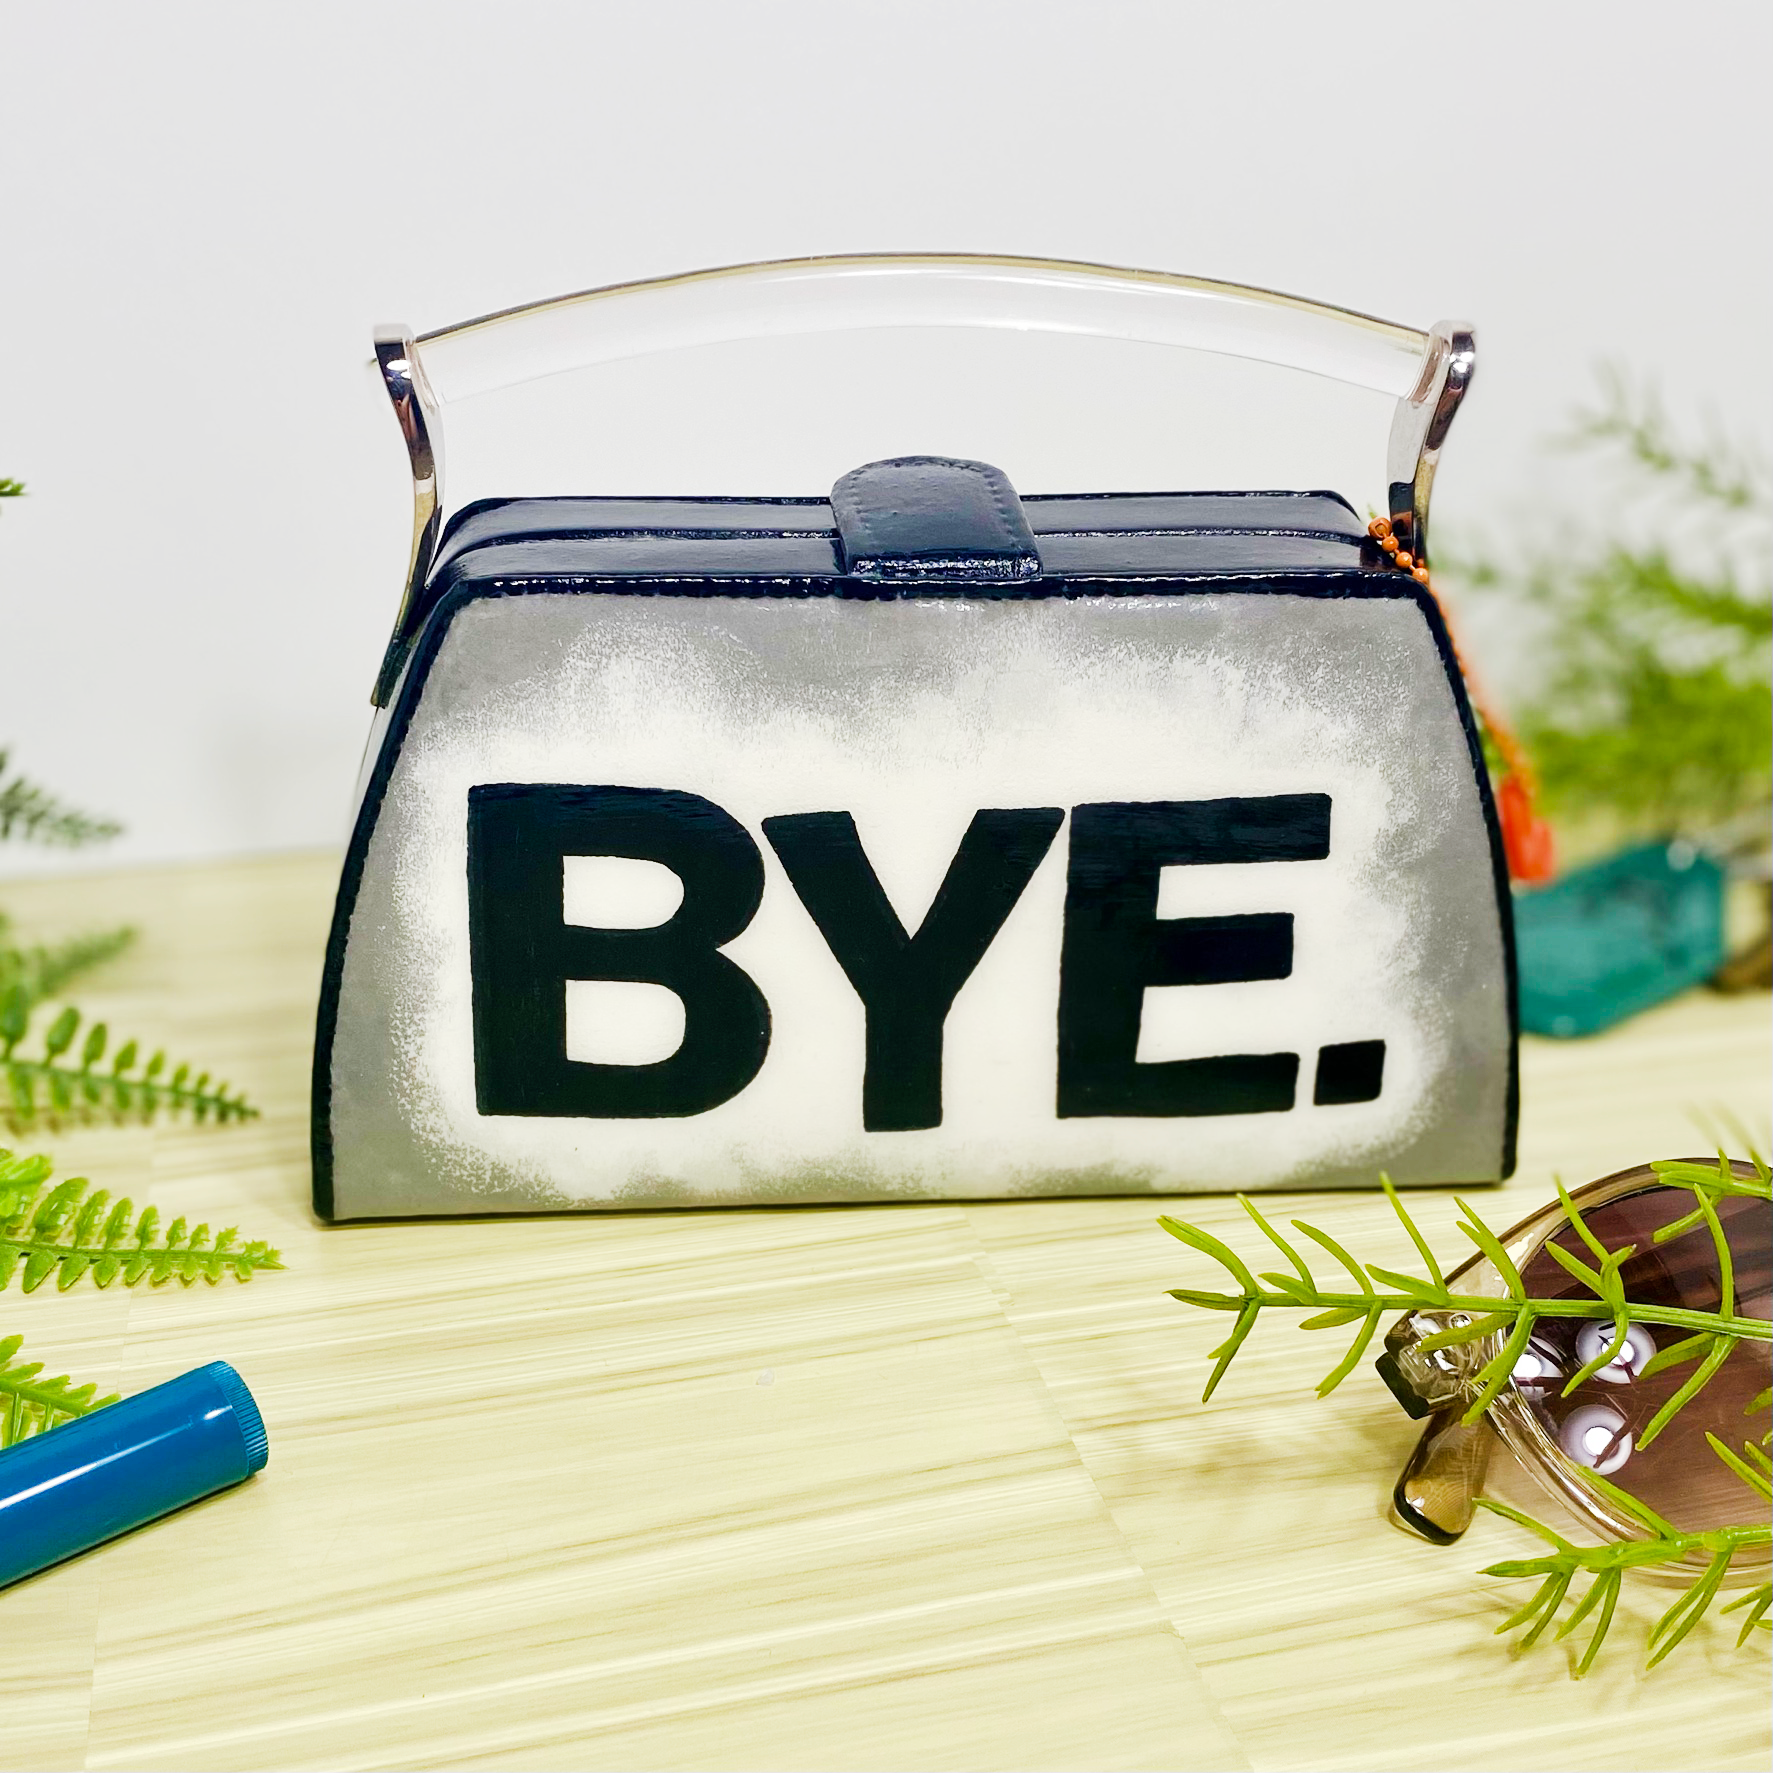 Box clutch with handpainted word, "bye", on a white background that fades into silver. Purse has clear handle and magnetic latch. Purse is on wood surrounded by faux plants.